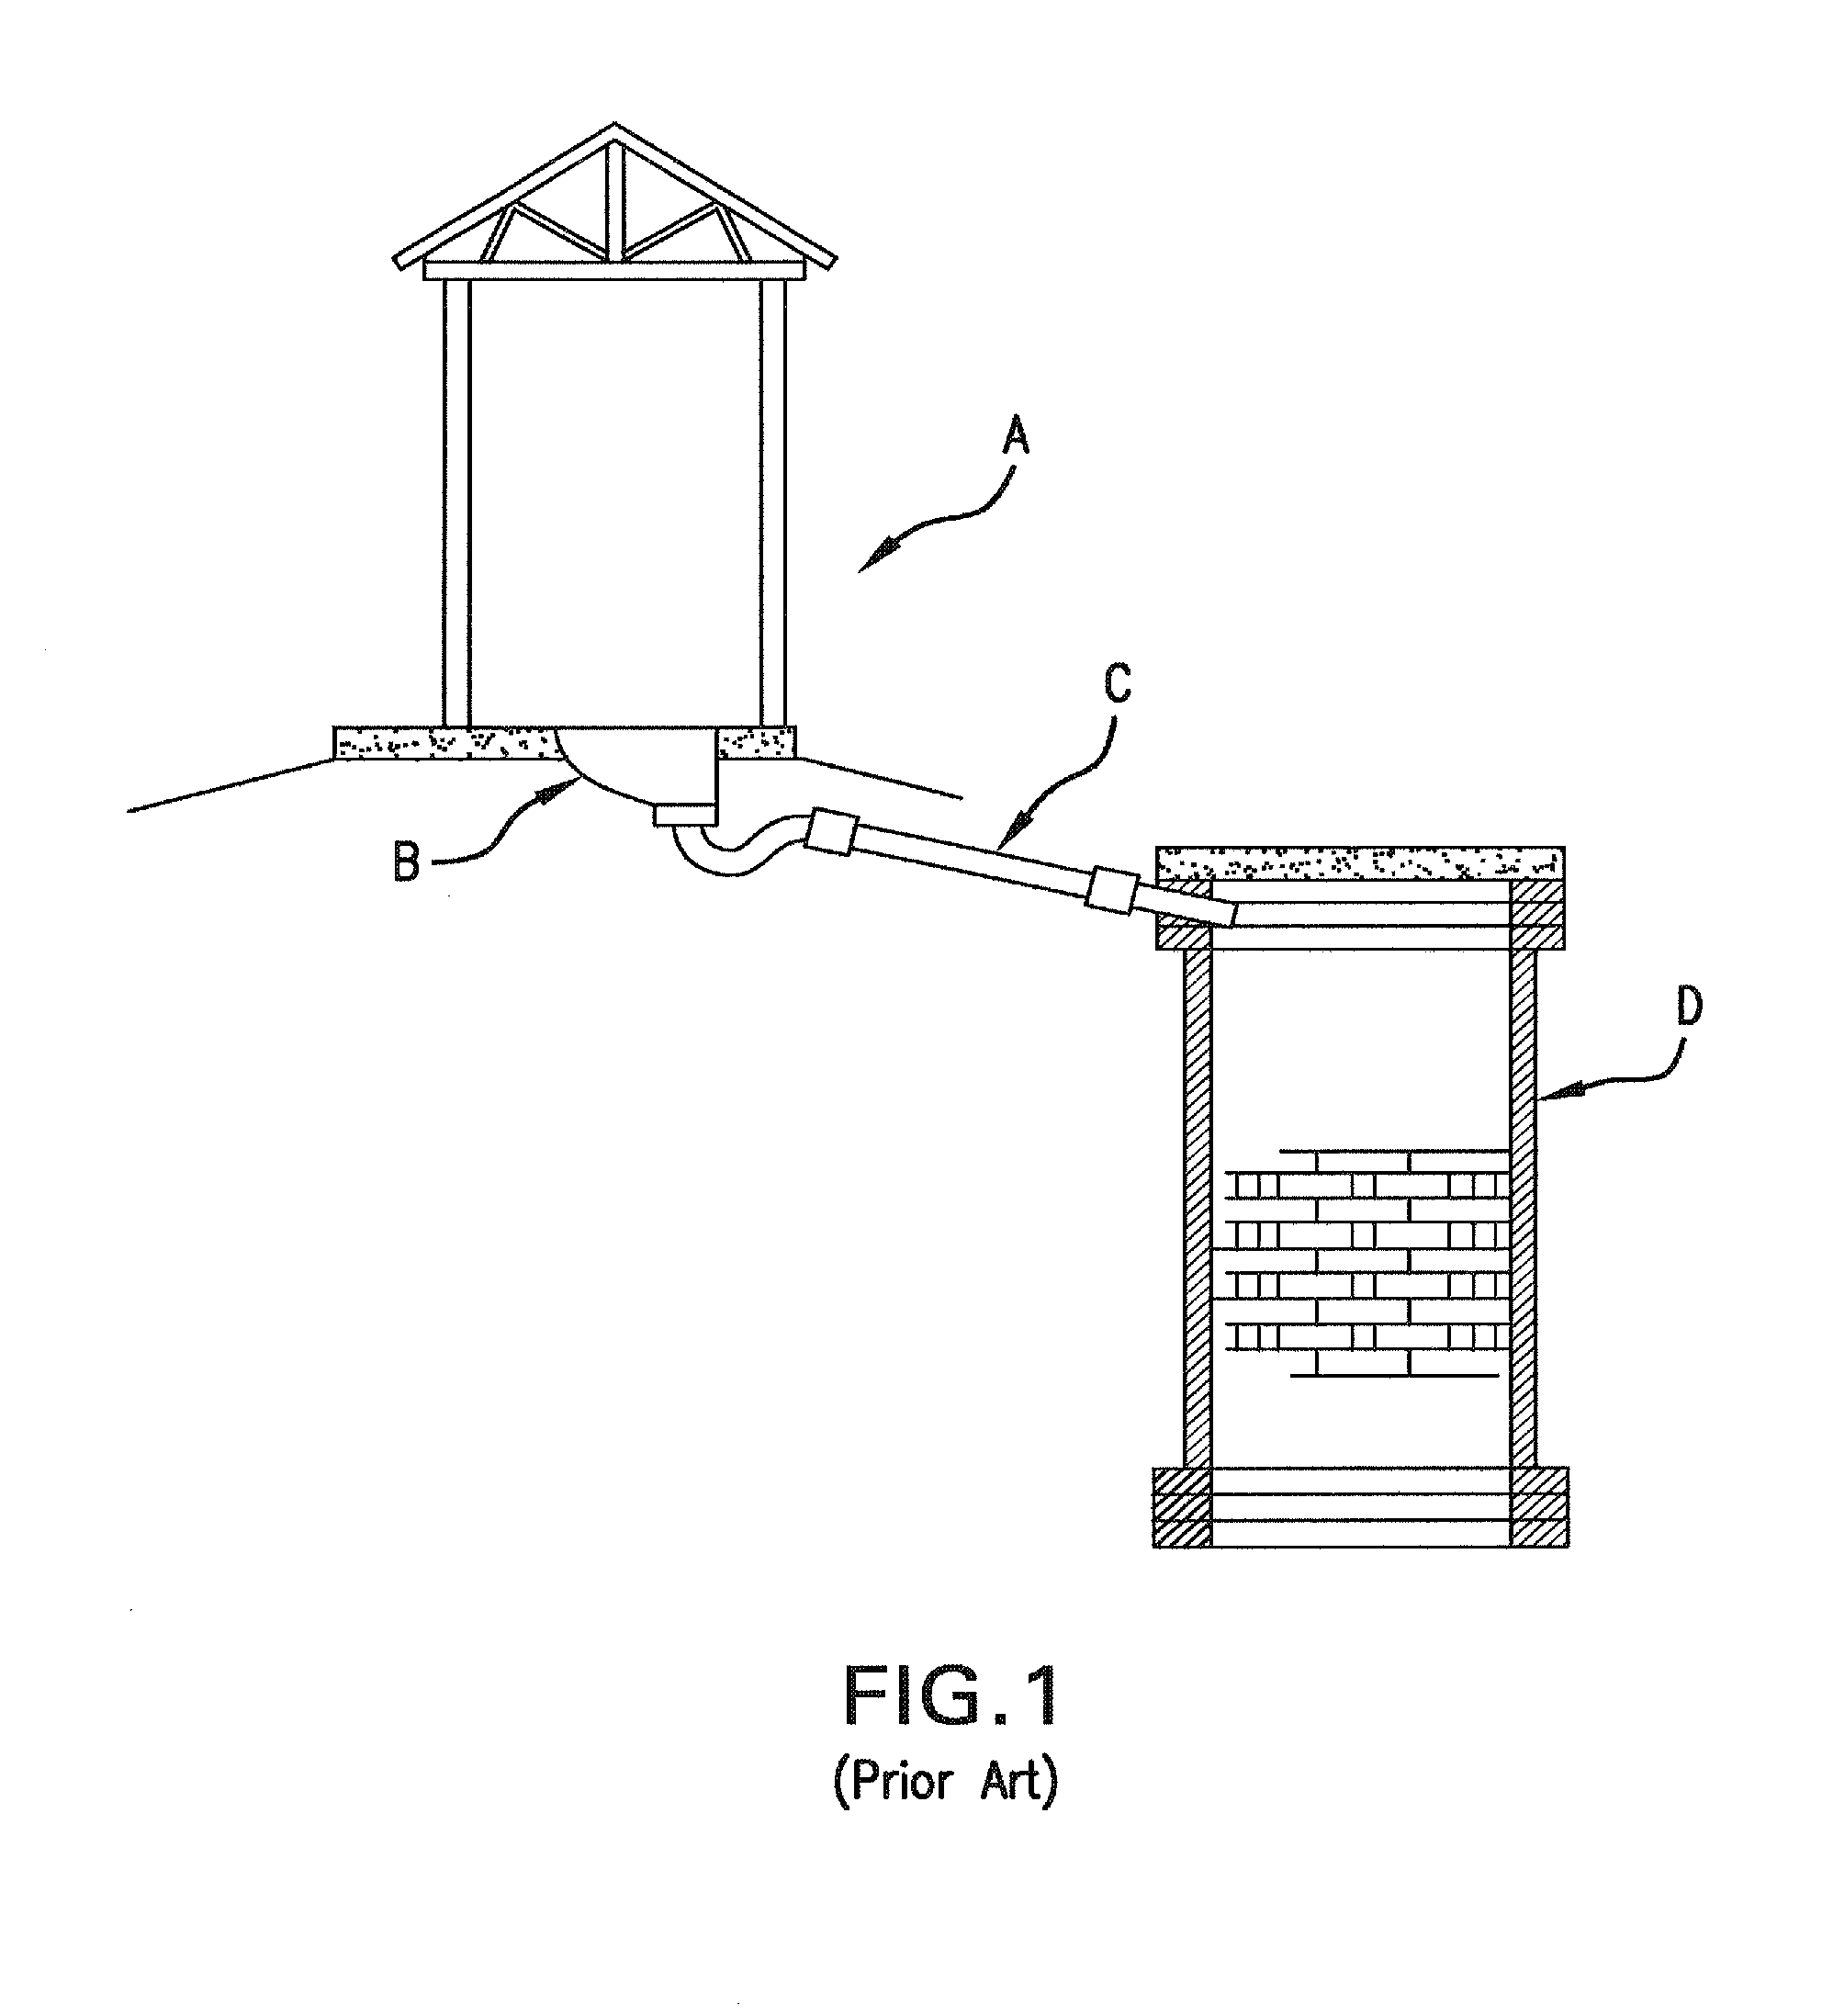 Collection Systems for Use in Offset Pit Latrines Having Pour Flush Latrine Pans, Collectors, Offset Pit Latrines and Related Methods